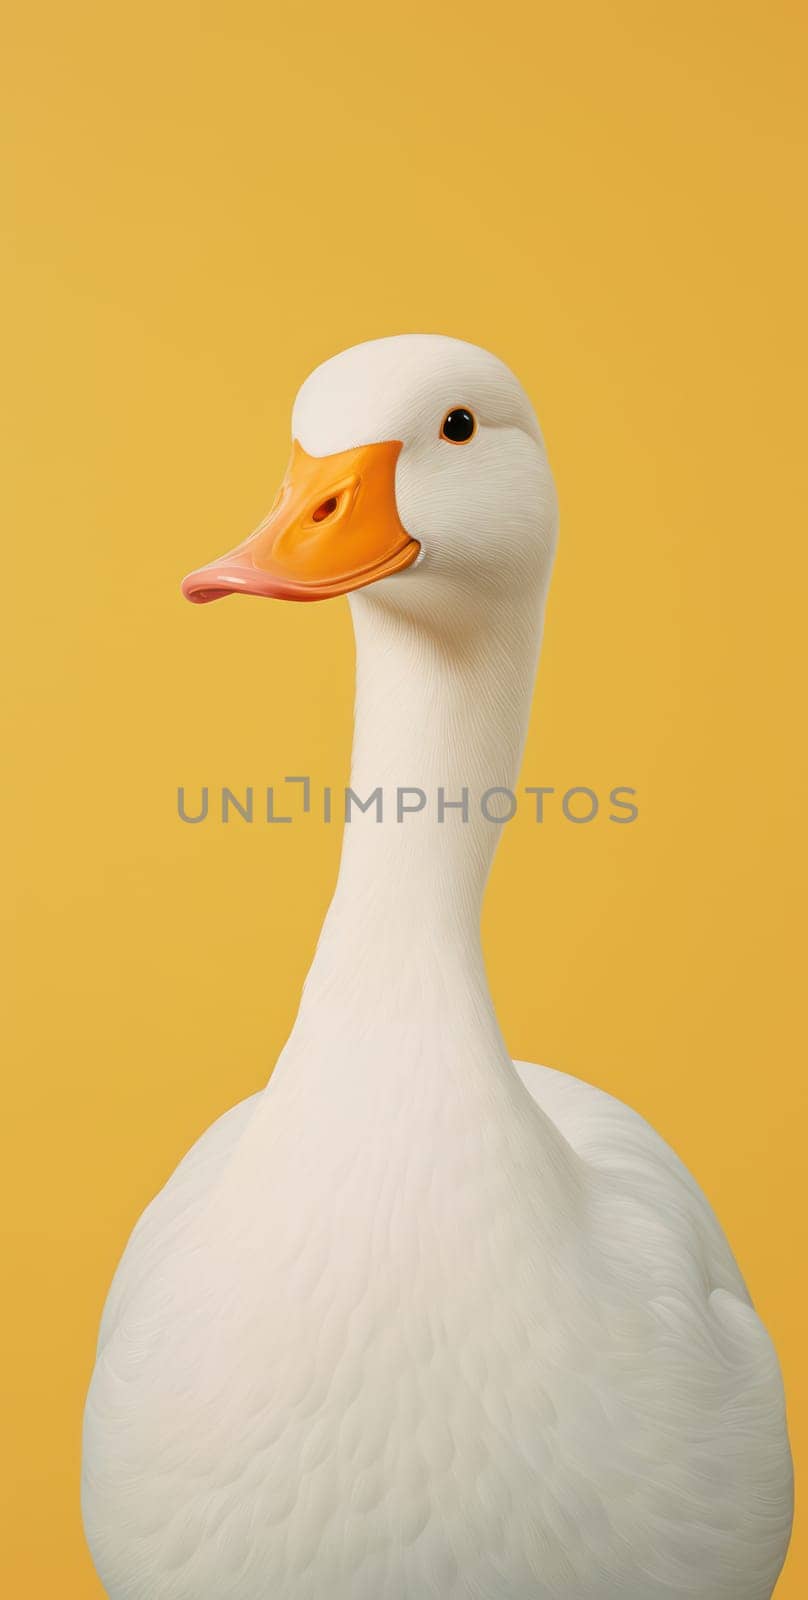 Graceful Bird: A Beautiful Isolated White Goose with Fluffy Feathers, Playfully Standing on Green Grass near Water, Gazing Curiously with Cute Orange Beak and Bright Yellow Eyes. by Vichizh